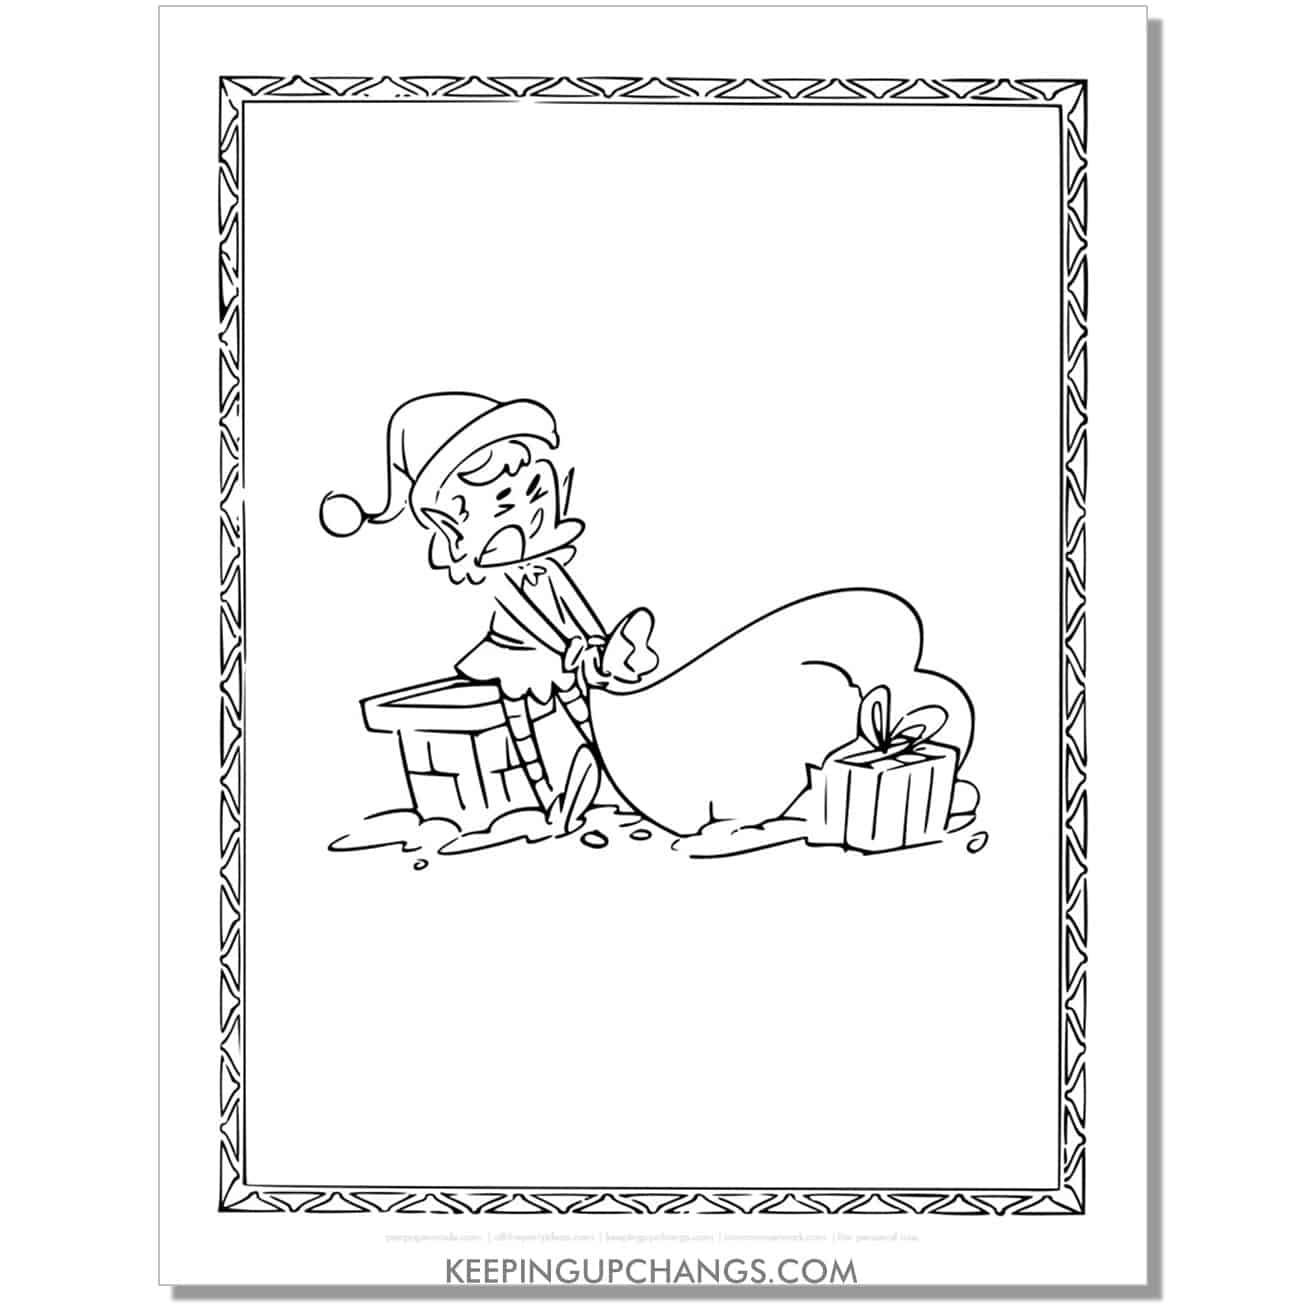 free funny elf dragging santa's sack to chimney top coloring page.